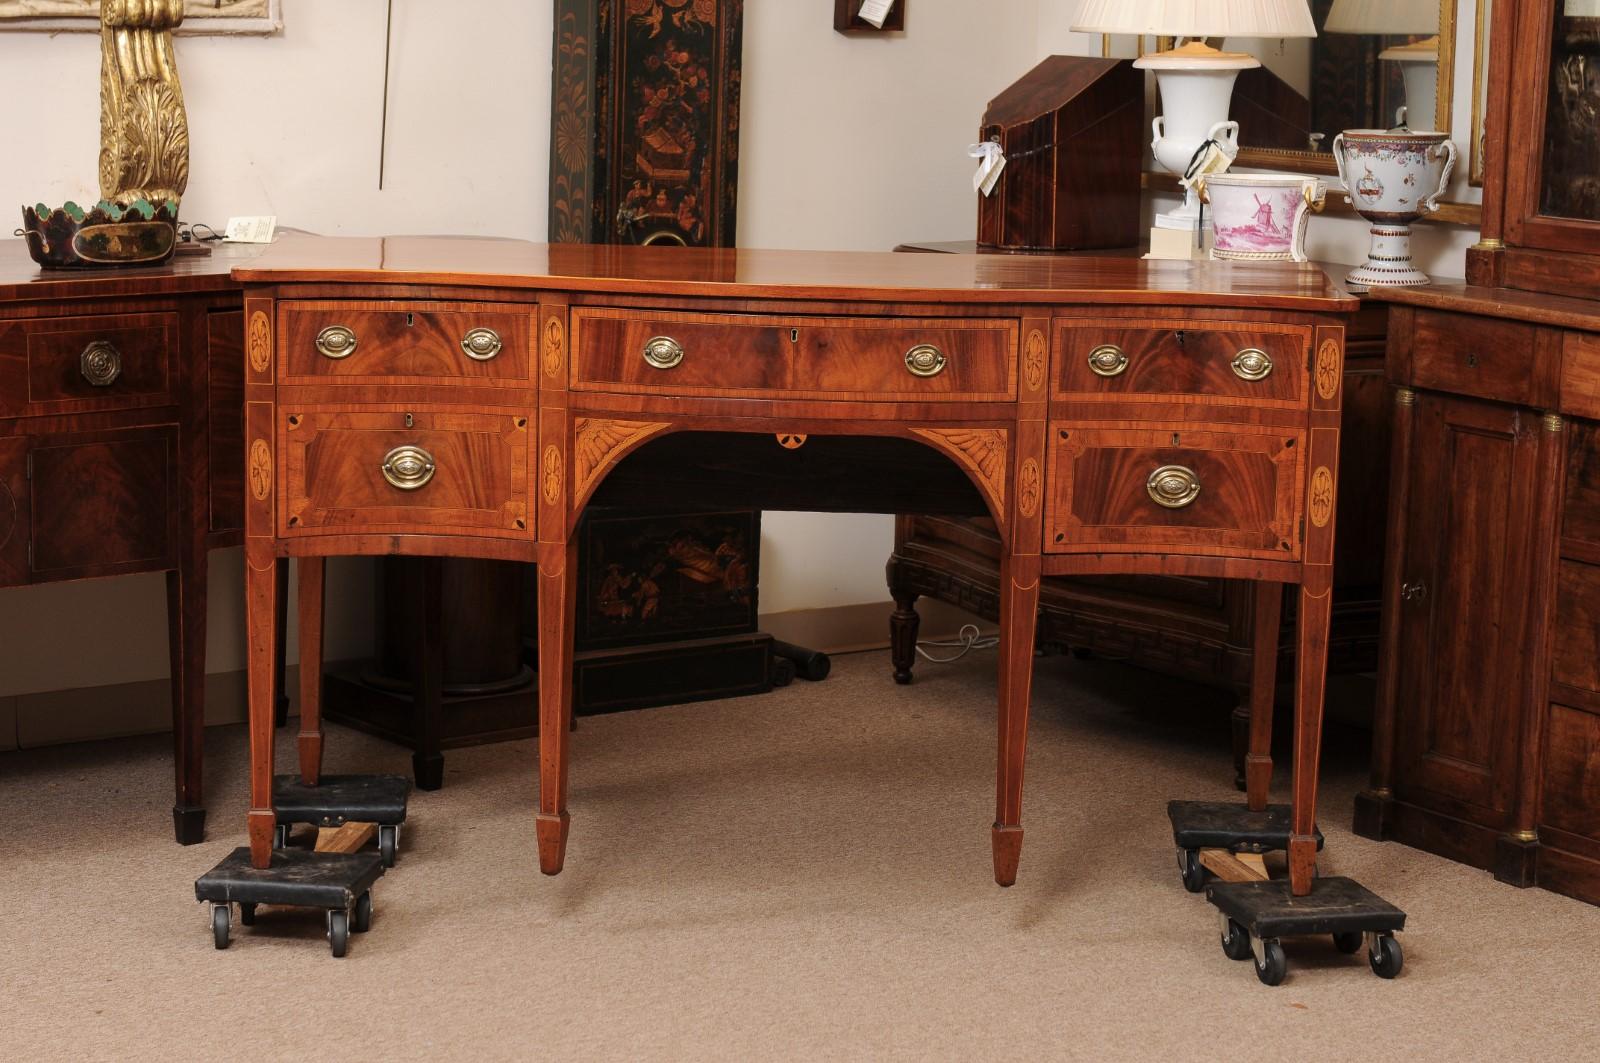 18th Century English Hepplewhite Sideboard in Inlaid Satinwood with Spade Feet For Sale 8